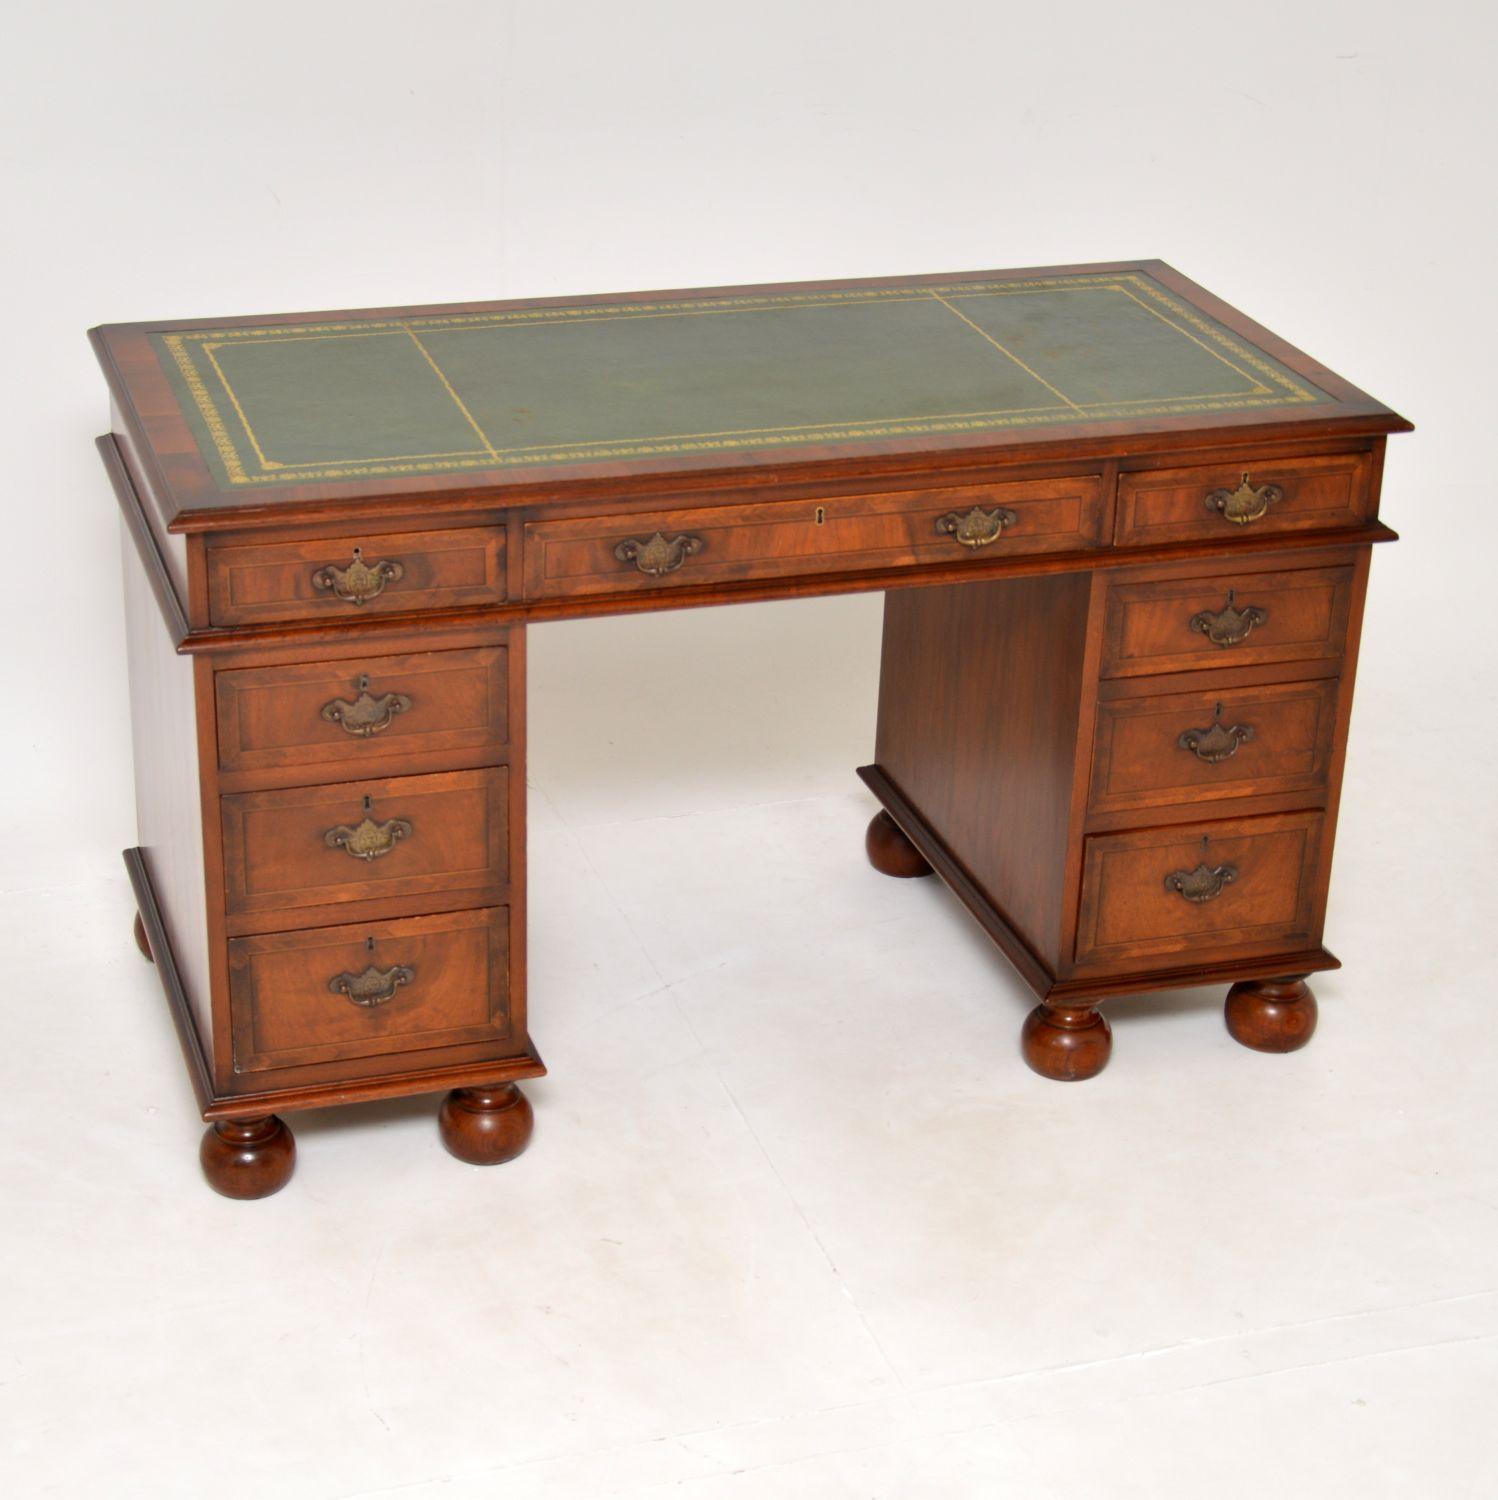 A stunning antique walnut desk, in the William and Mary style. This was made in England, it dates from around the 1930’s period.

The quality is exceptional, this is so well made with gorgeous walnut veneers on a completely solid oak construction.